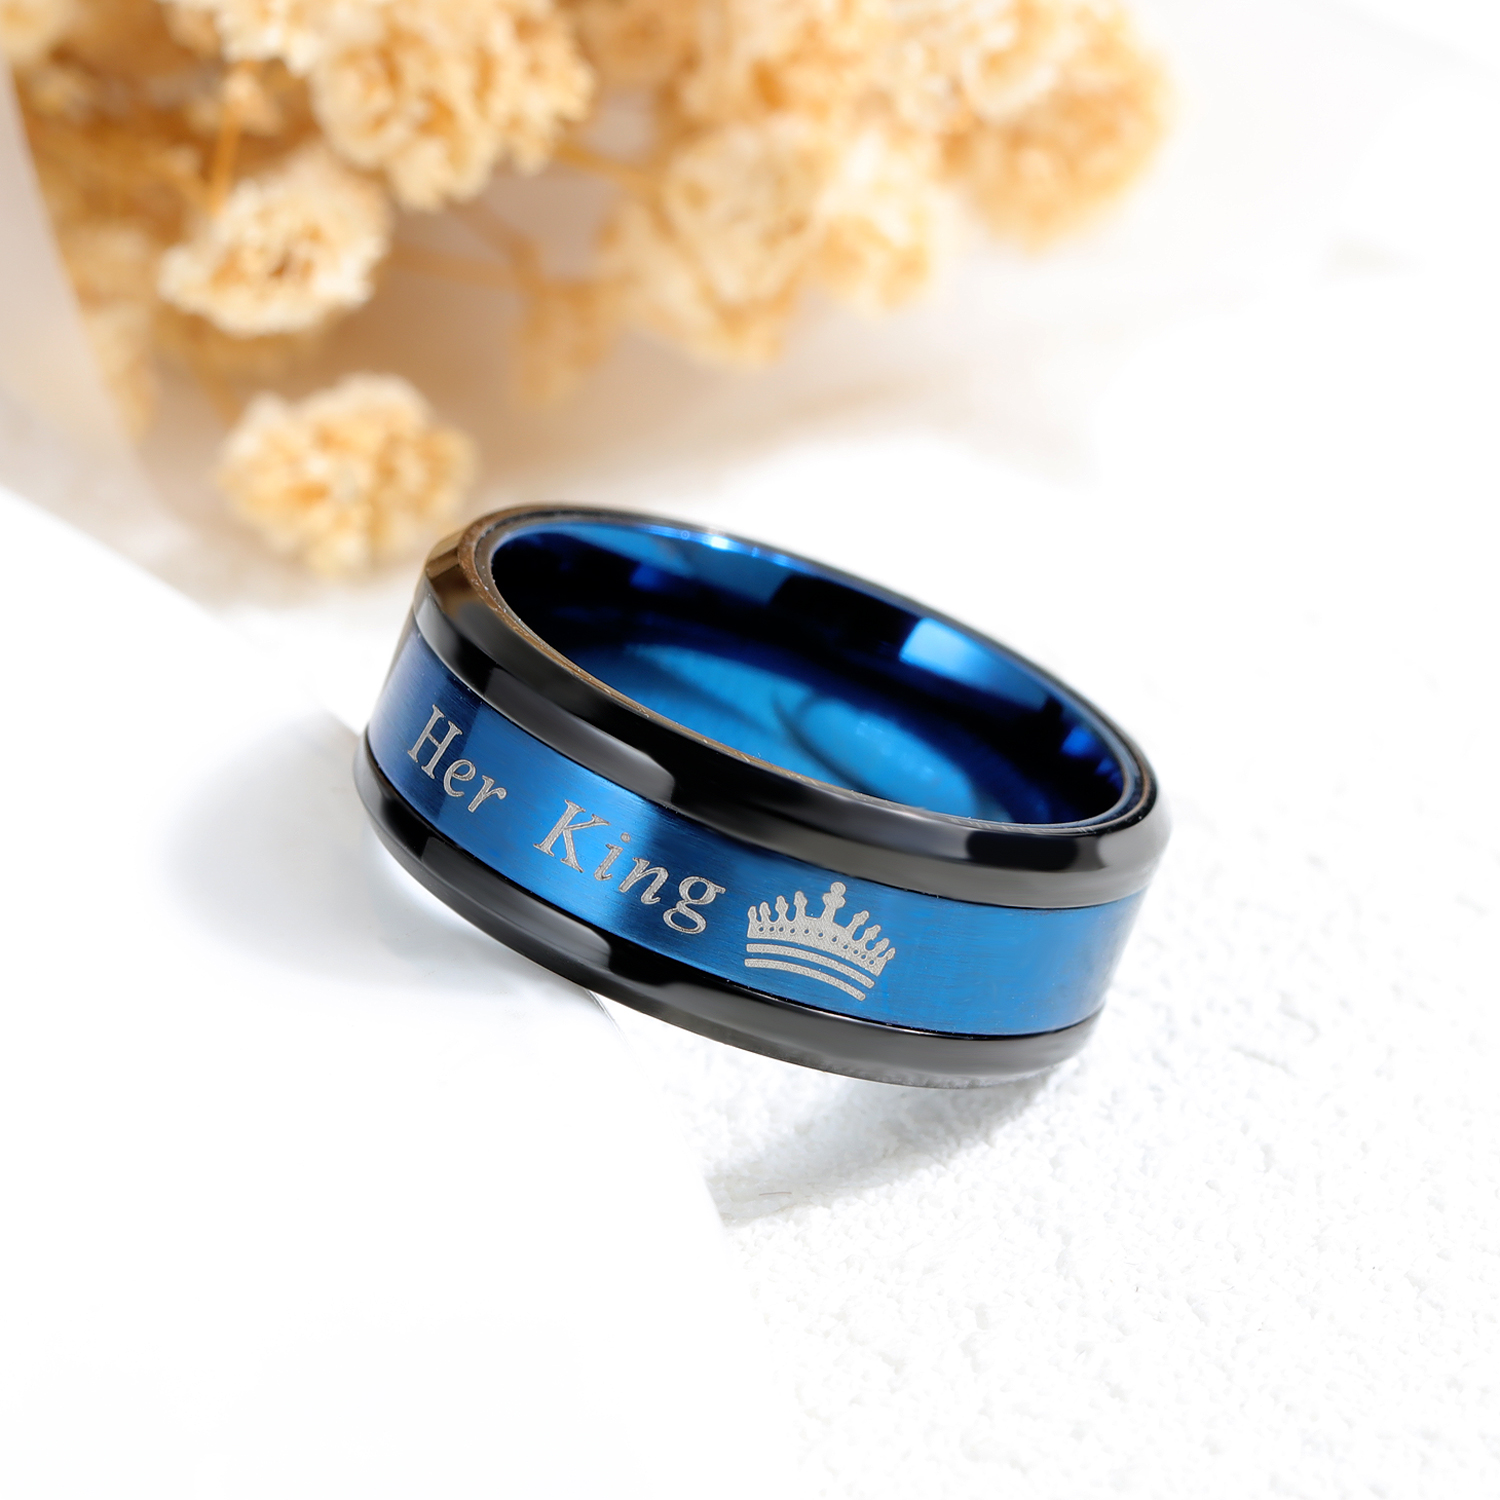 King Couple Stainless Steel Ring